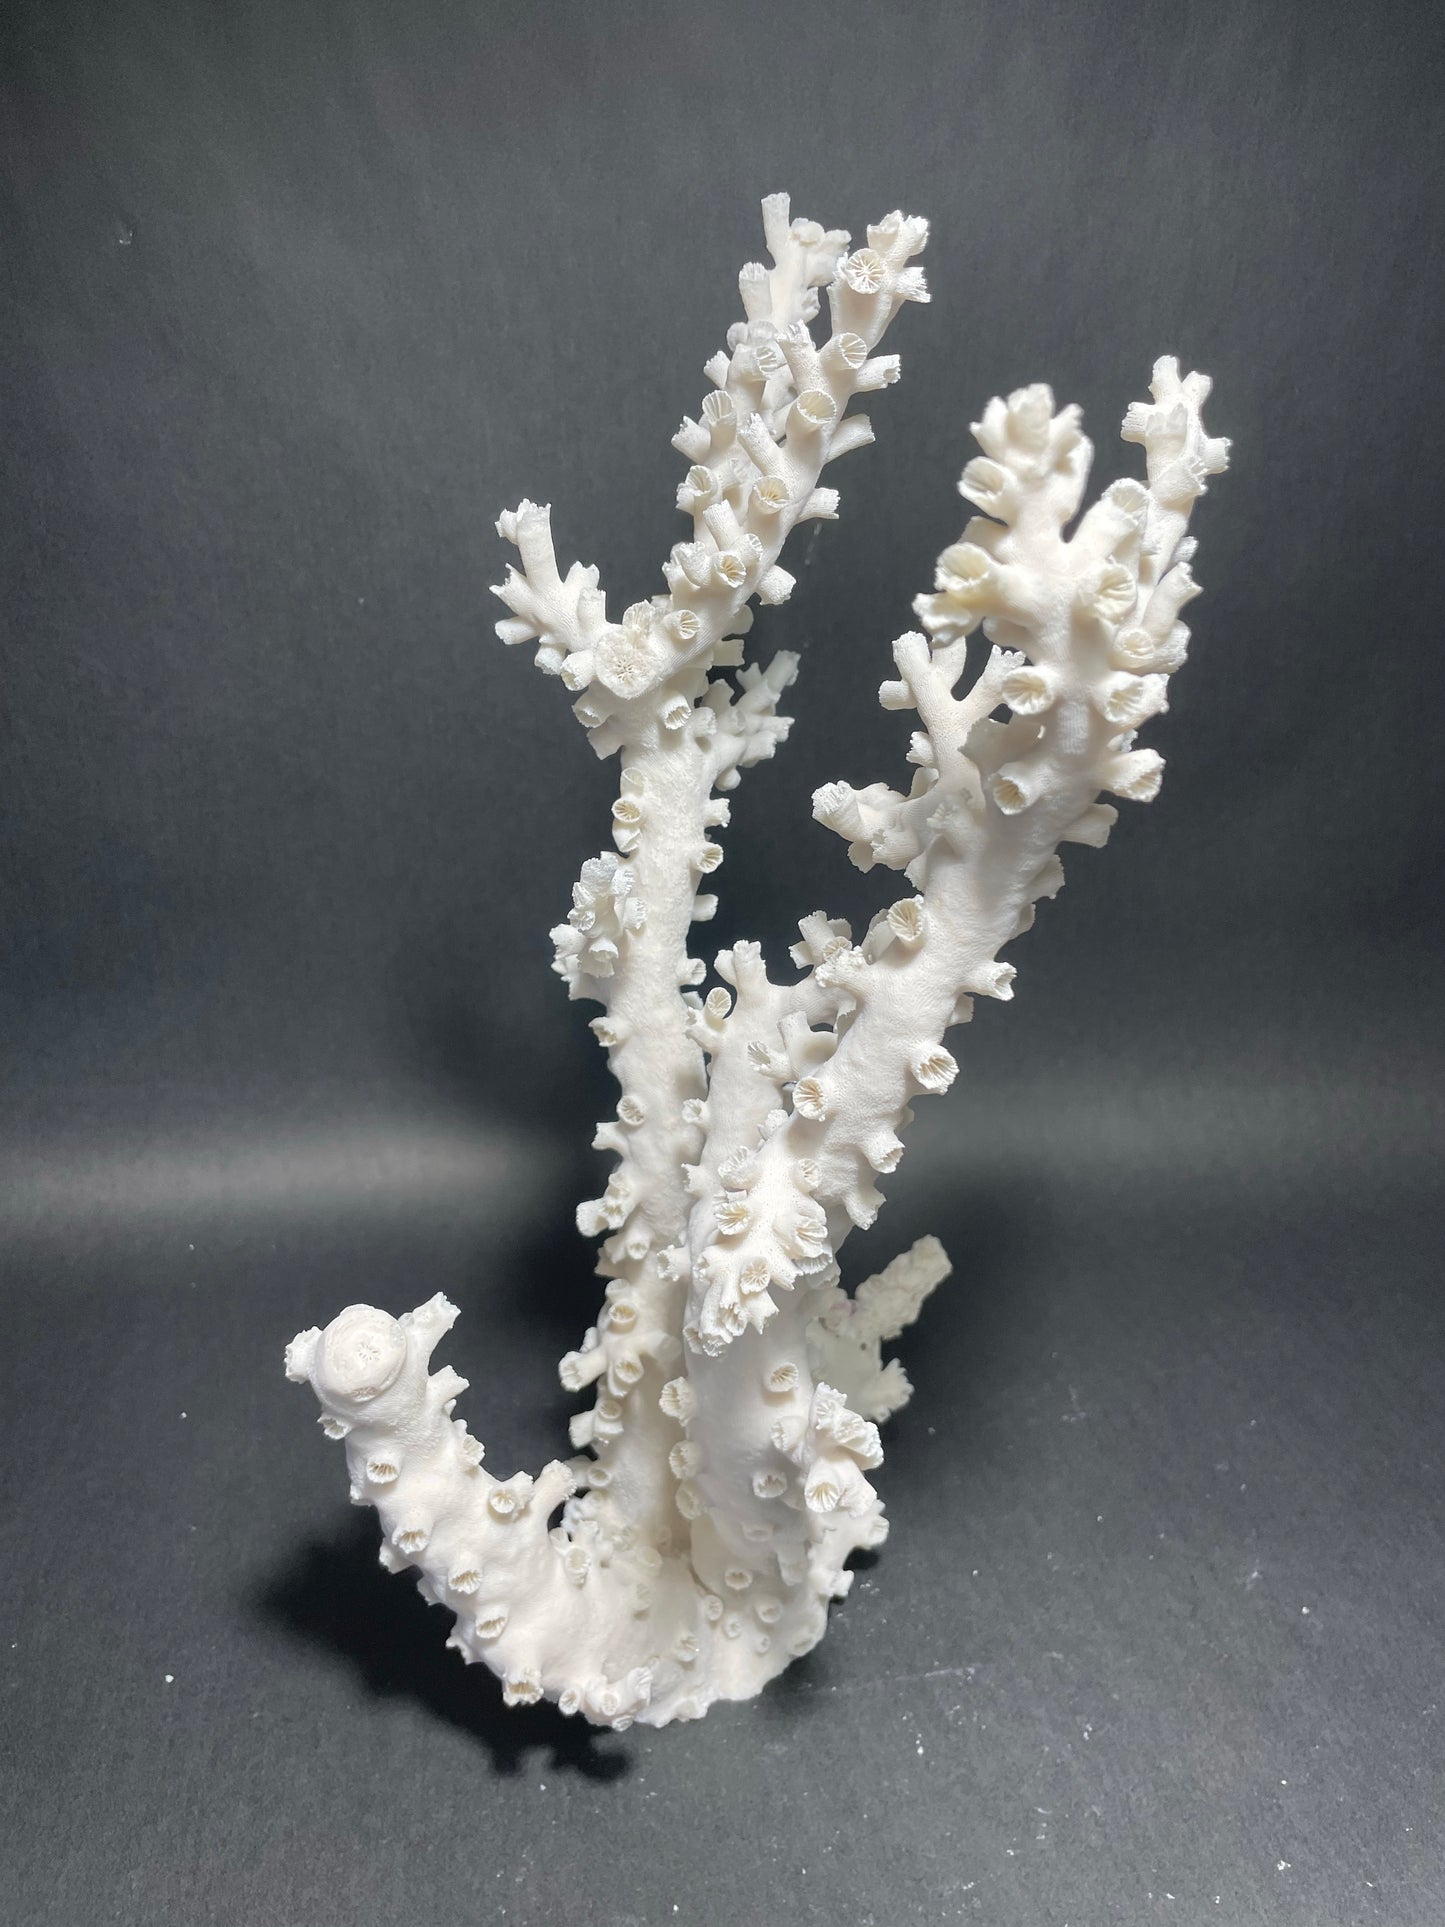 Octopus Coral (12”x8”x8”)